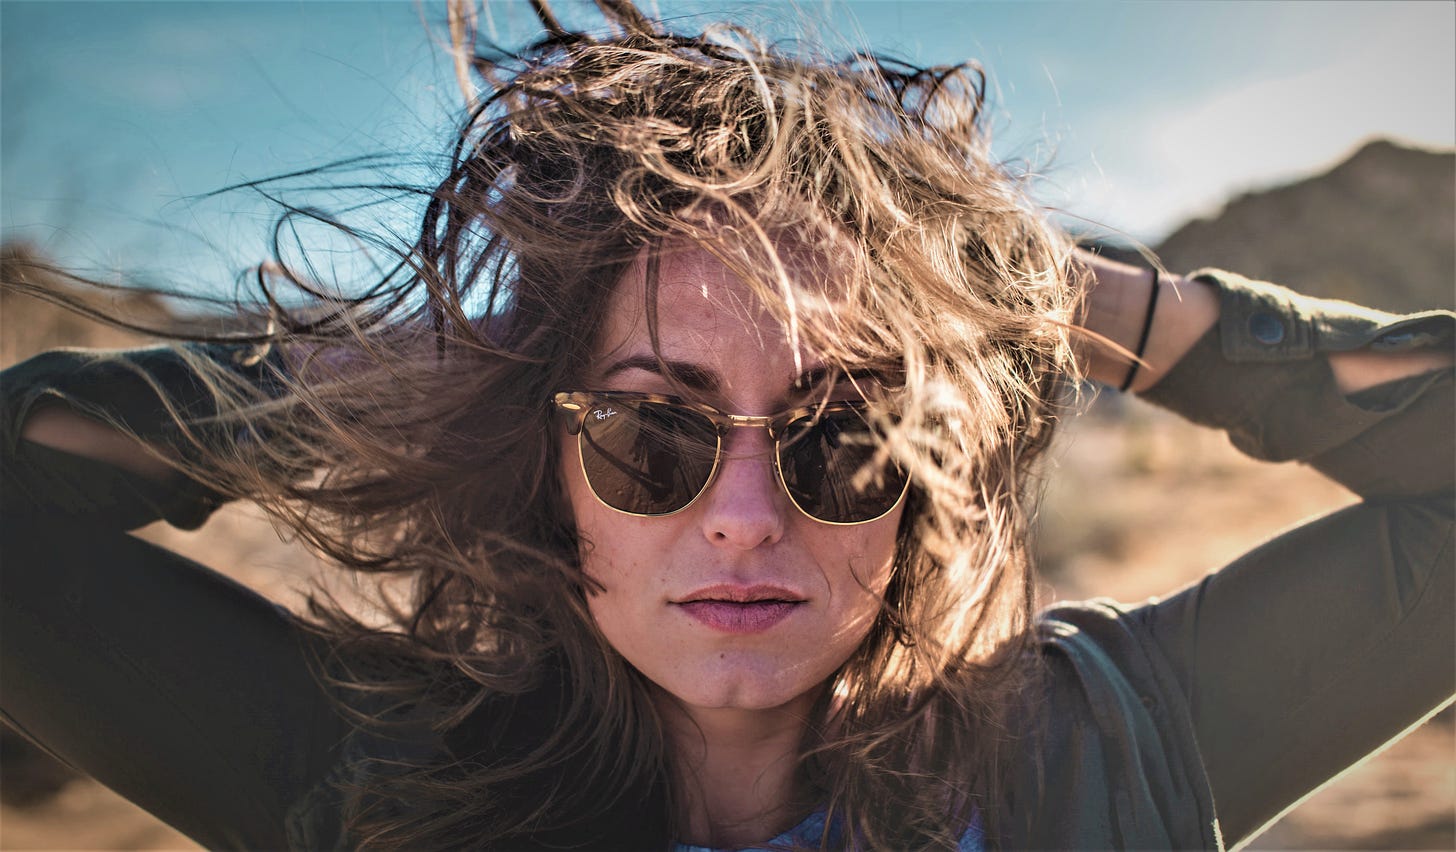 girl with brown hair wearing sunglasses and dark top with hands behind her head